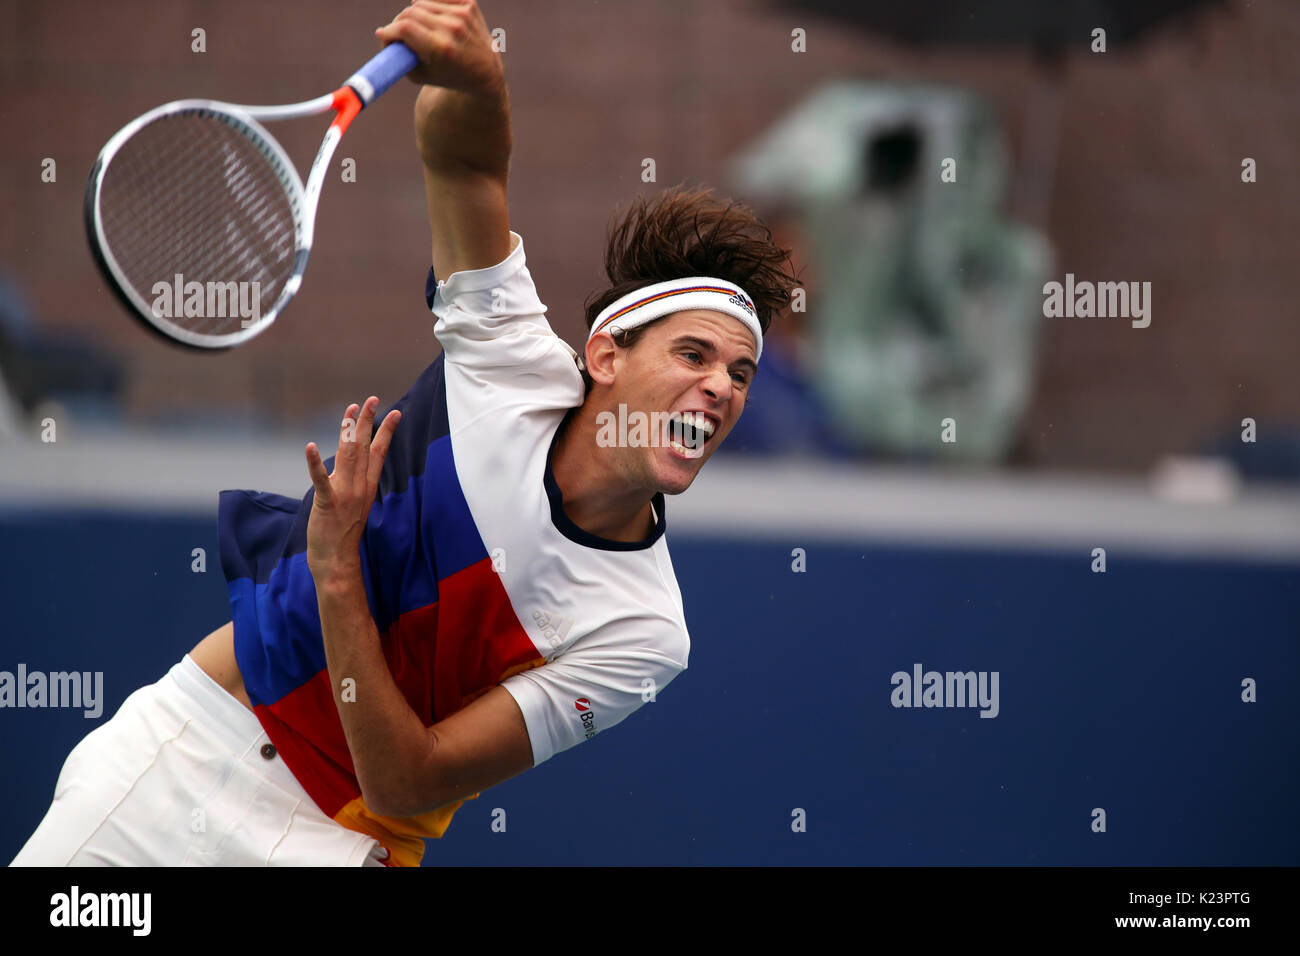 New York, United States. 29th Aug, 2017. US Open Tennis: New York, 29 August, 2017 -Dominic Thiem of Austria serving to Alex de Minaur of Australia during their first round match at the US Open in Flushing Meadows, New York. Credit: Adam Stoltman/Alamy Live News Stock Photo